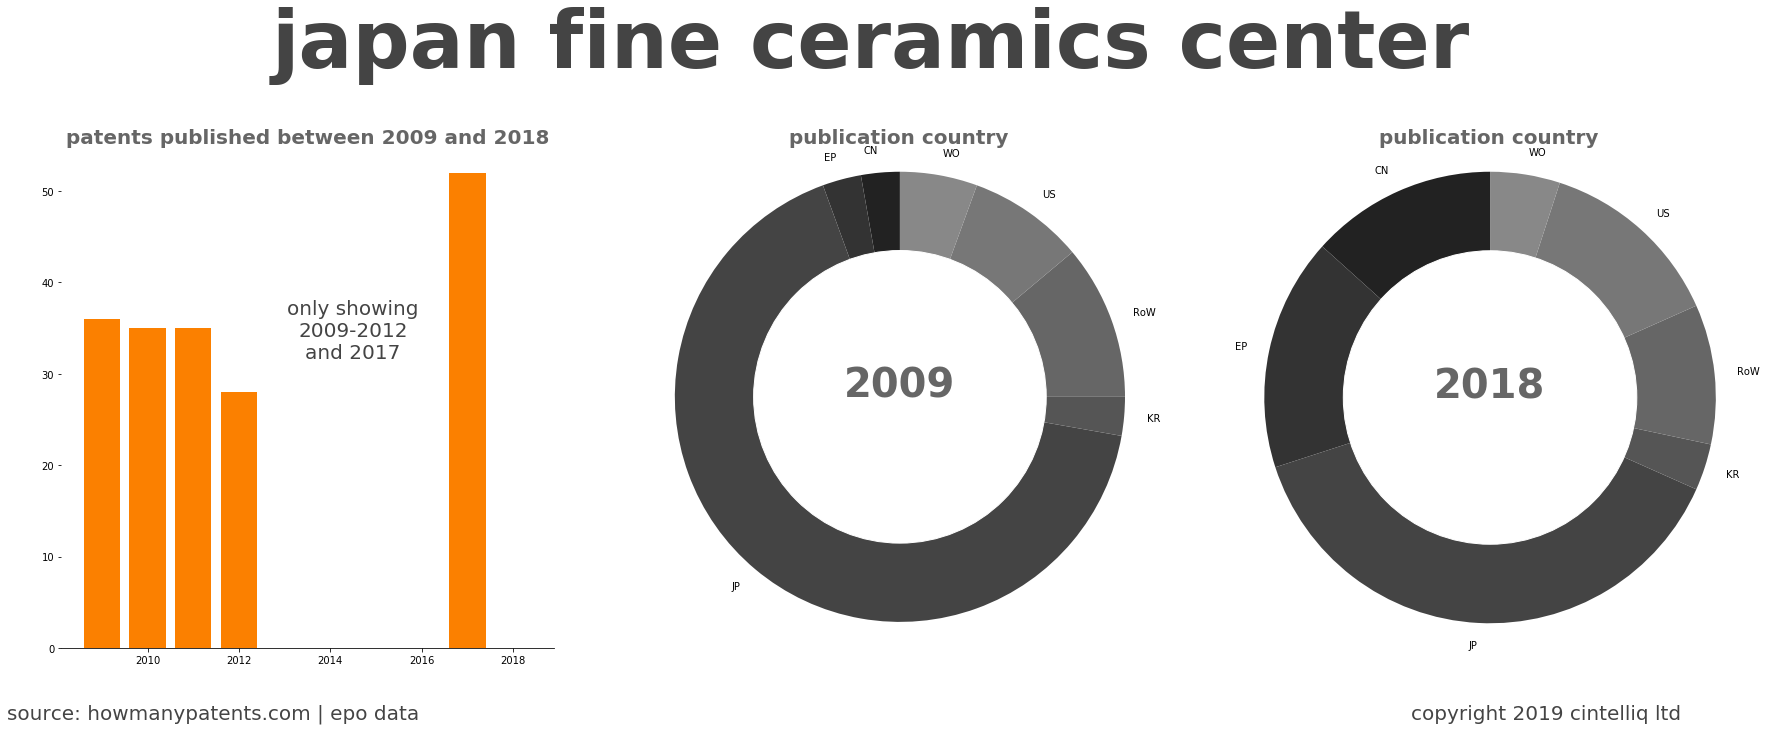 summary of patents for Japan Fine Ceramics Center